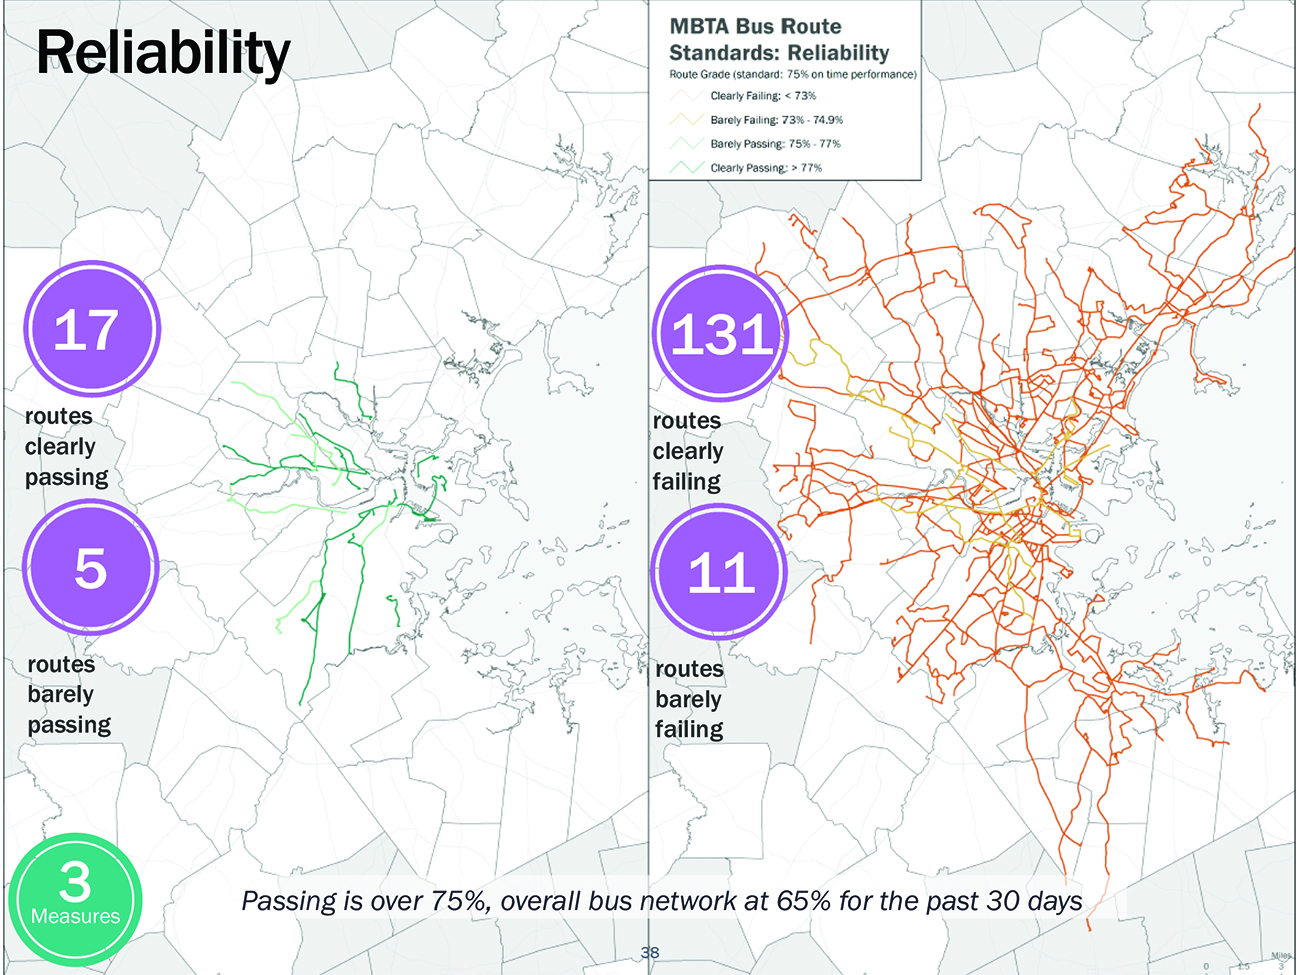 Figure 6-20 shows two maps of the Boston Region. The first shows 17 routes clearly passing and 5 routes barely passing reliability measures. The second map shows 131 routes clearly failing and 11 routes barely failing reliability measures. All four categories are depicted in different colors. 